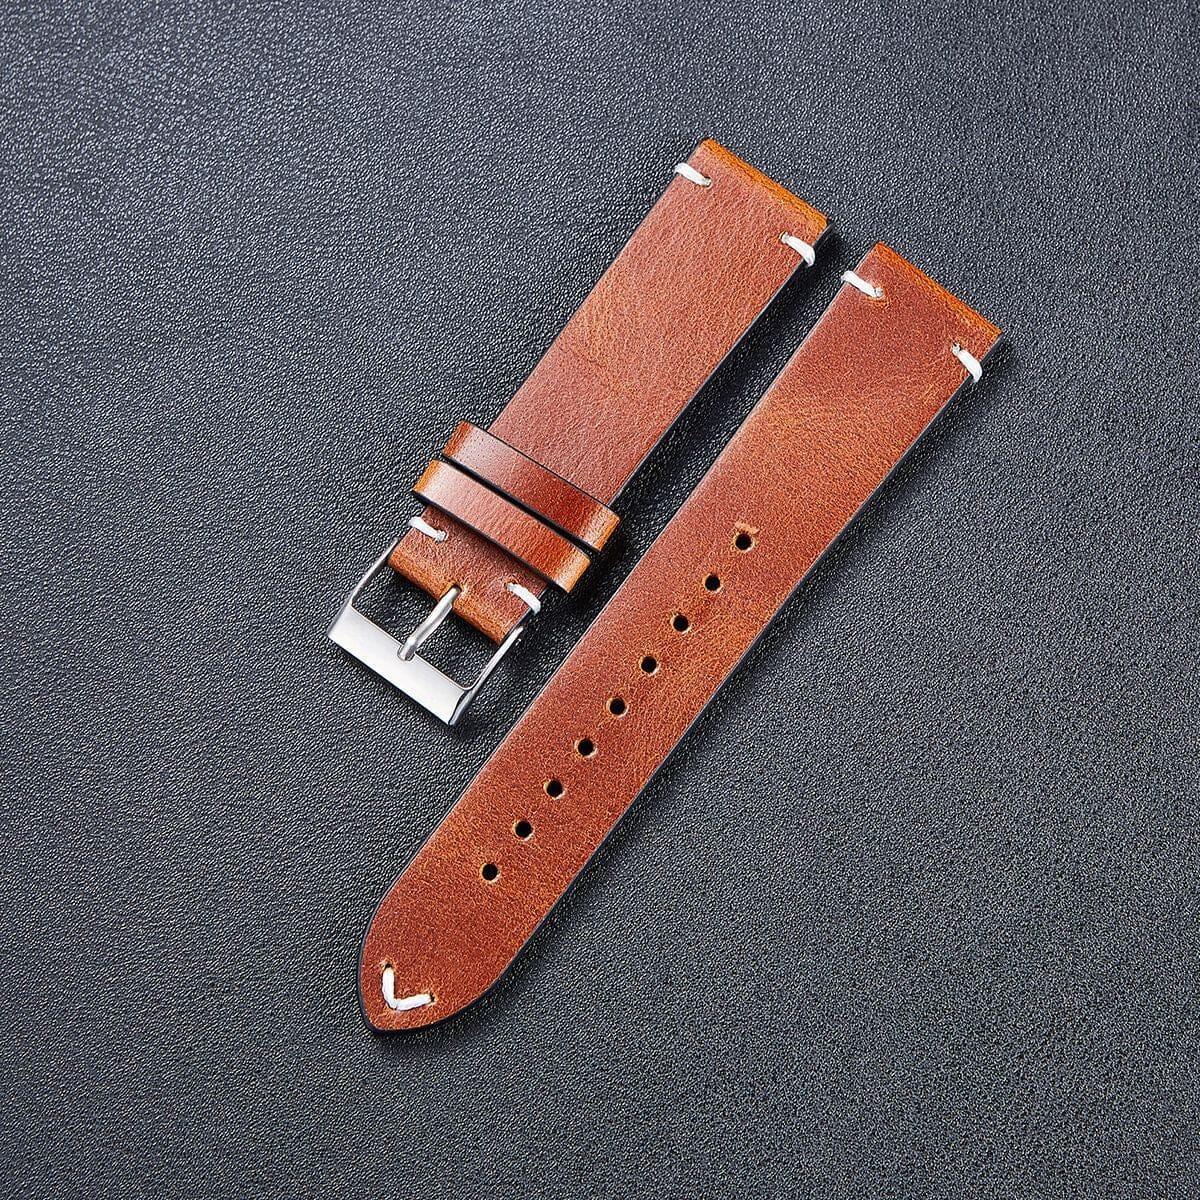 Vintage Oiled Leather Watch Straps Compatible with the Skagen 20mm Range